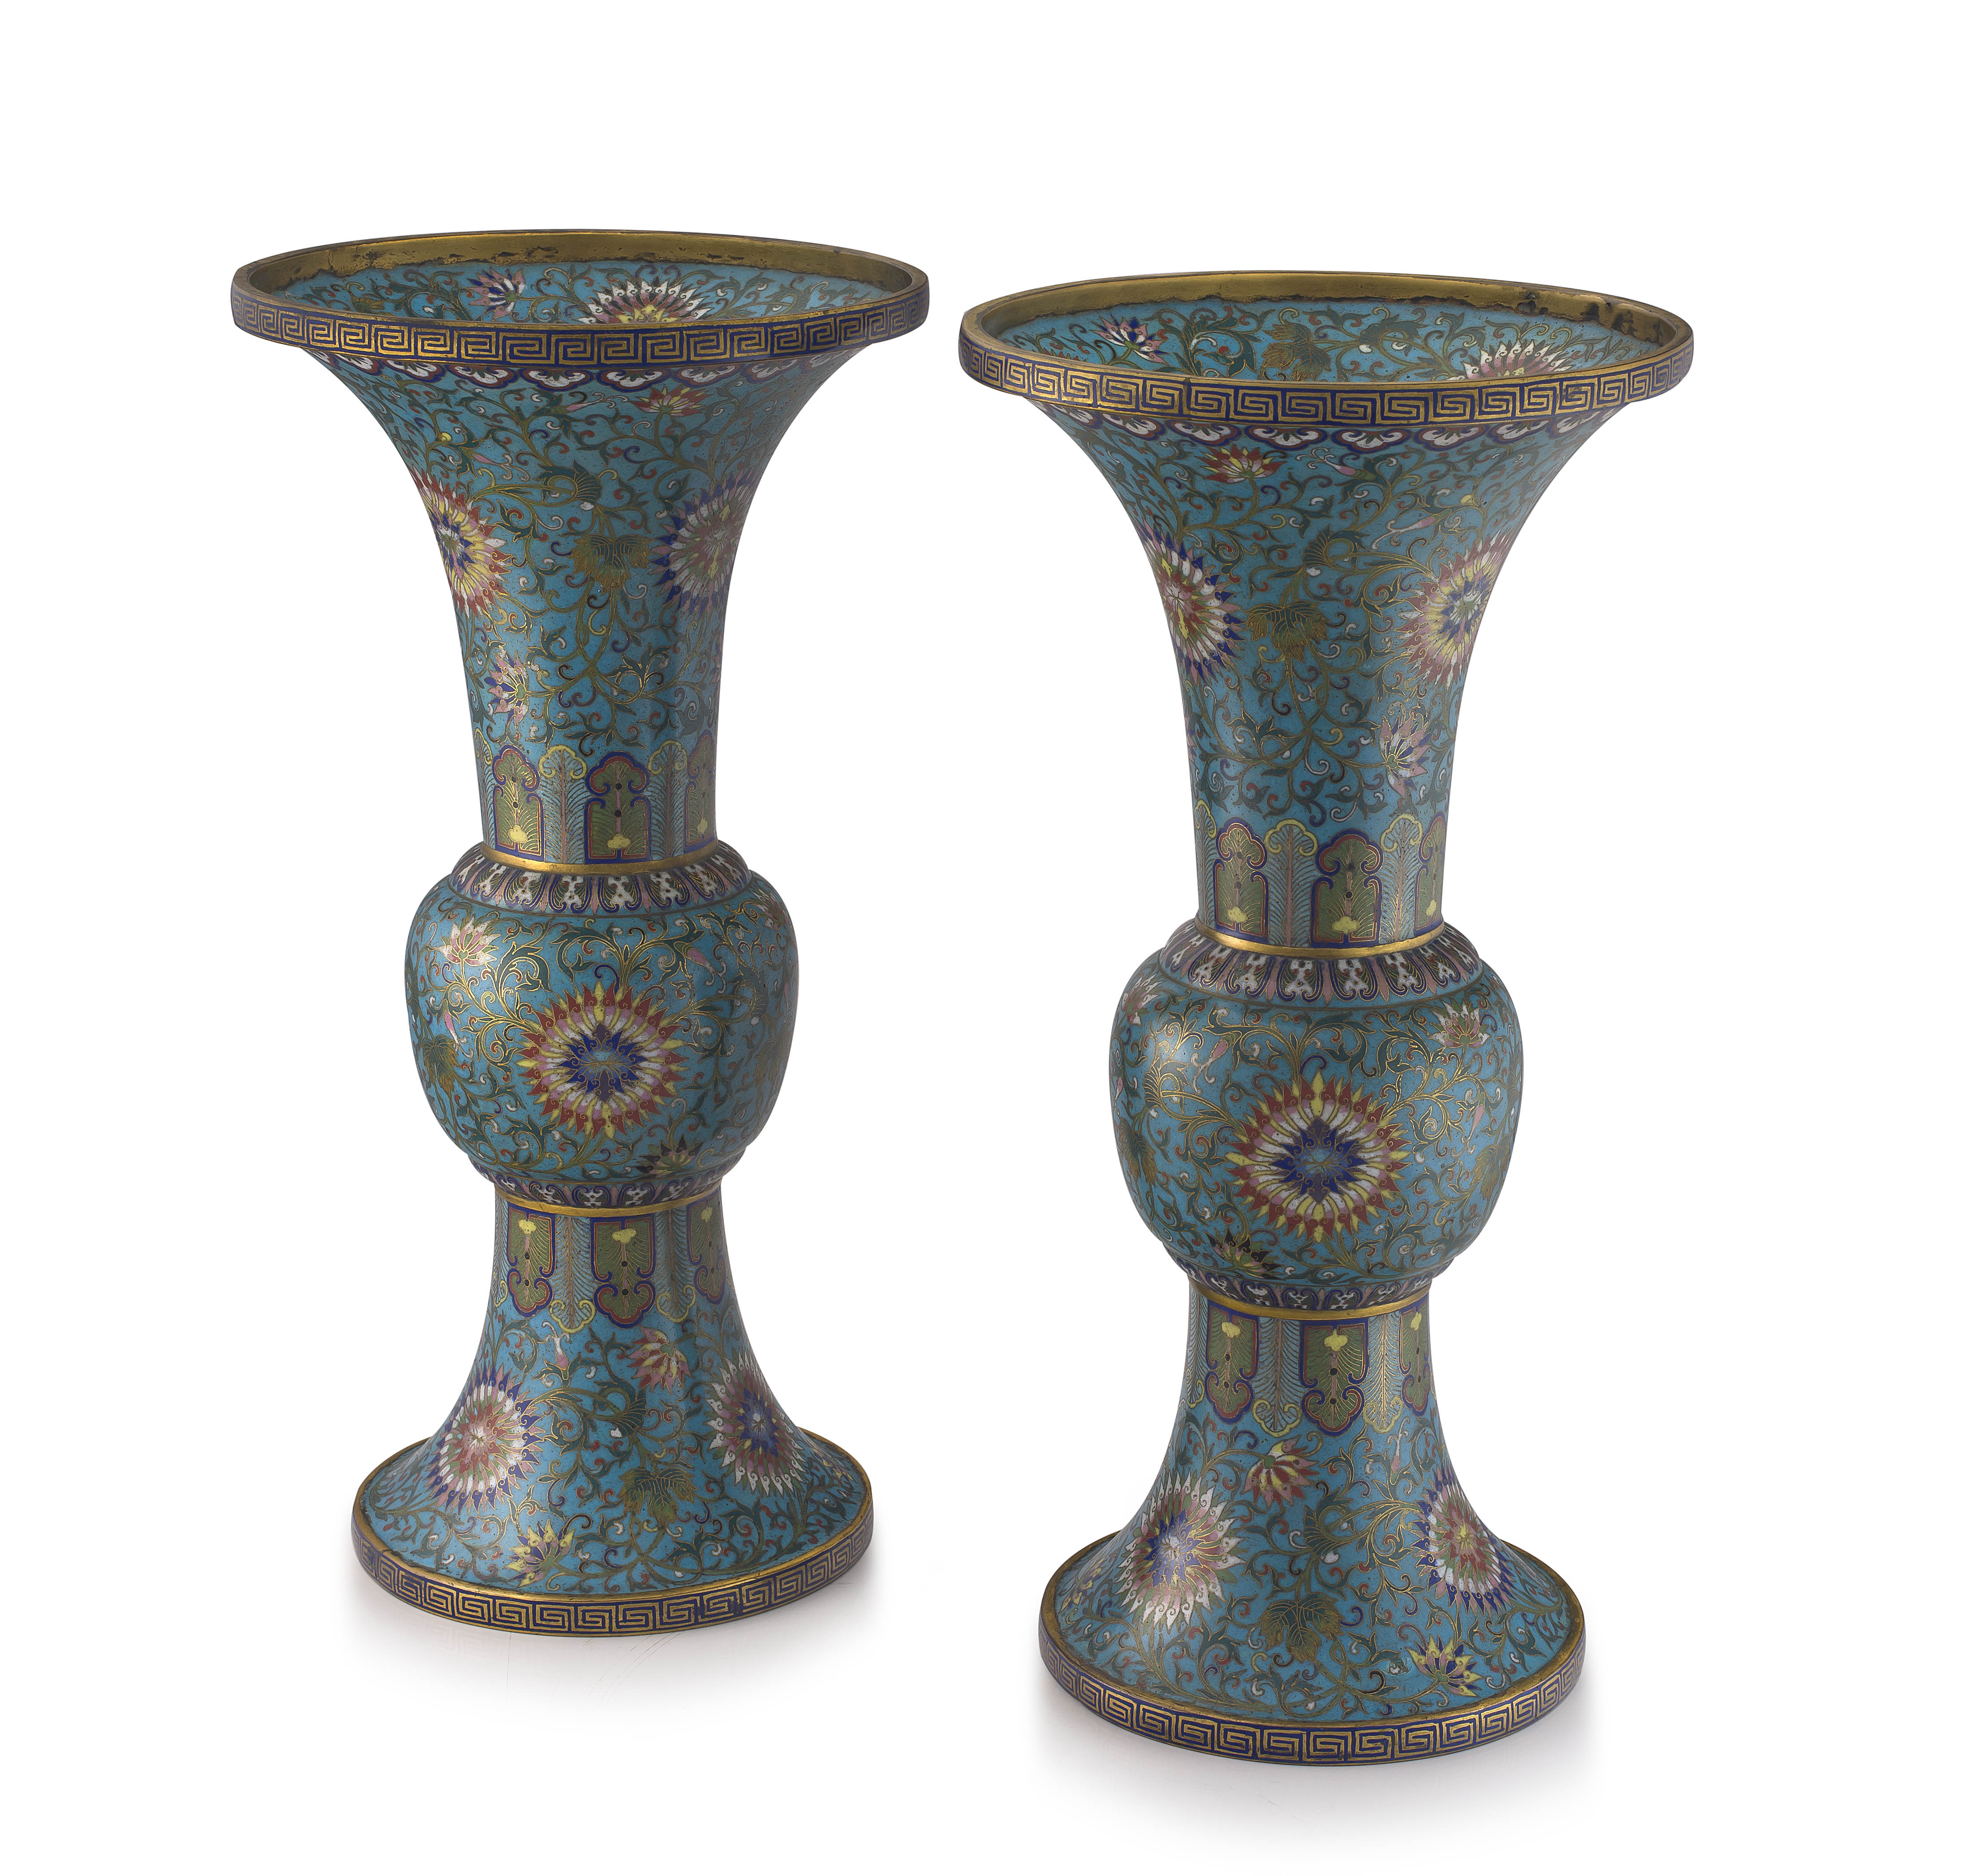 A pair of Chinese cloisonné enamel vases, Gu, Qing Dynasty, 19th century